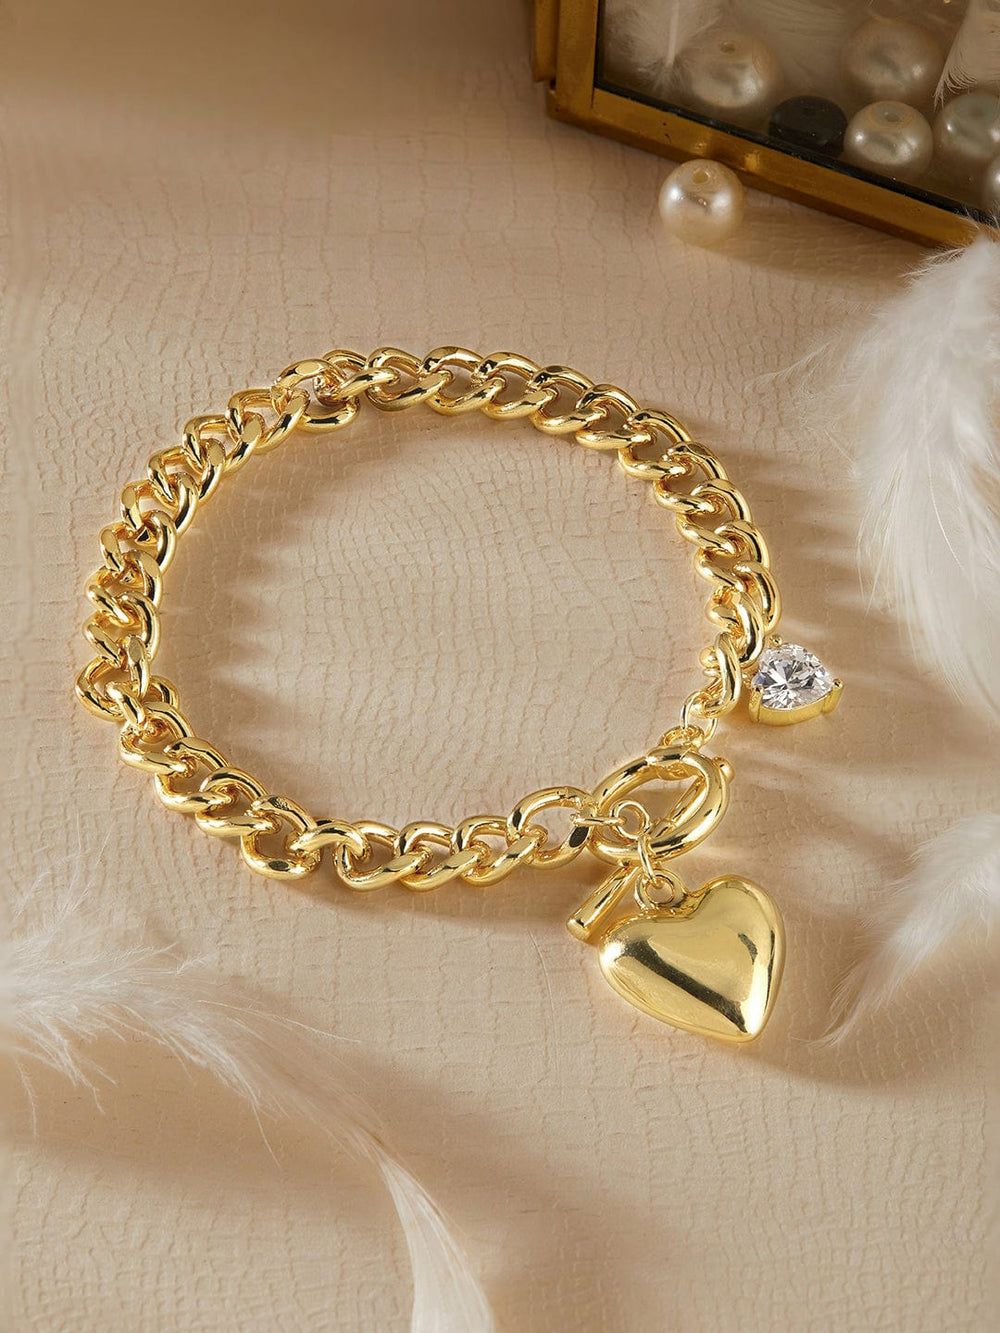 Rubans Voguish 18K Gold Plated Stainless Steel Waterproof Cuban Style Bracelet With Heart Charm And Zircon Studded Details. Bangles & Bracelets